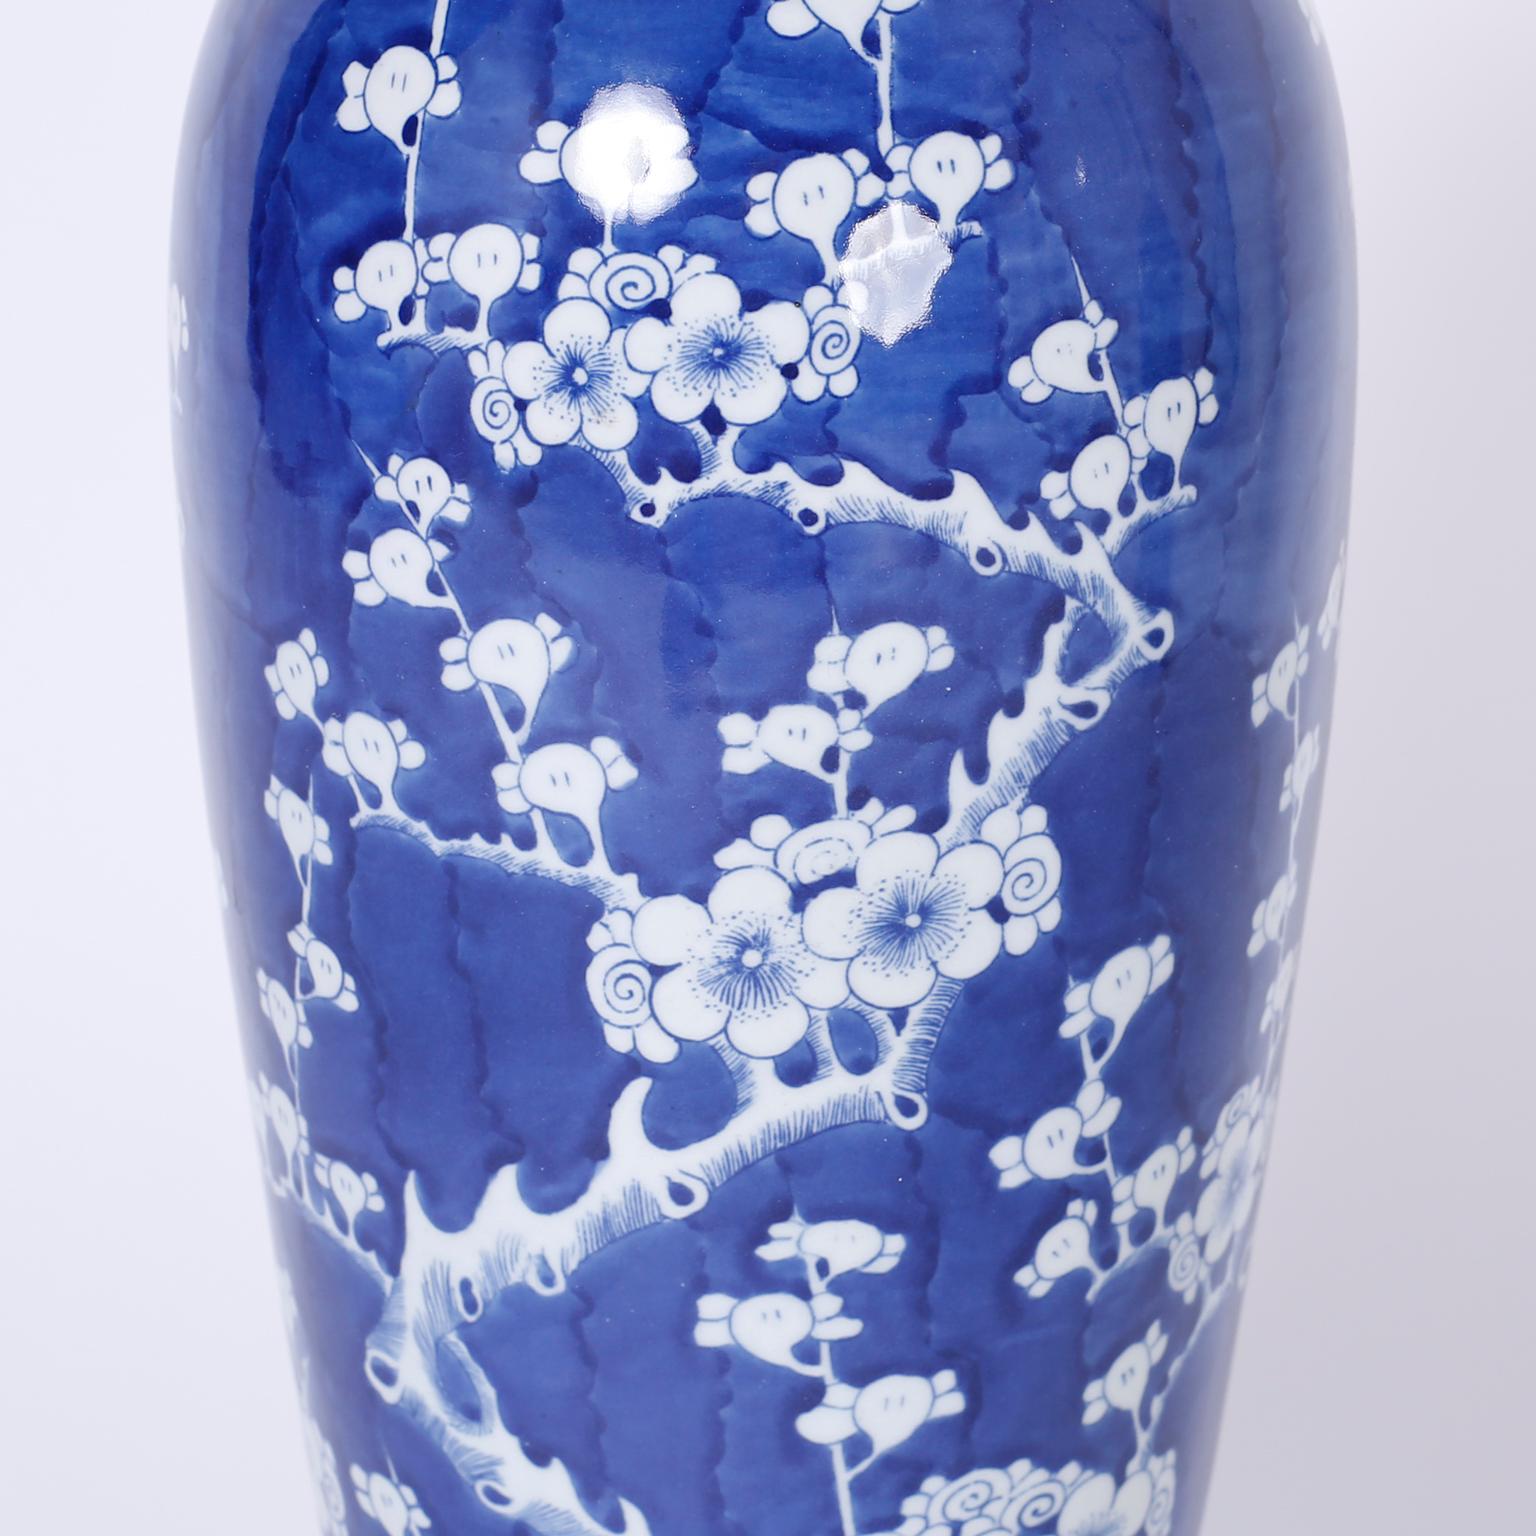 Chinoiserie Pair of Tall Blue and White Chinese Porcelain Jars or Urns